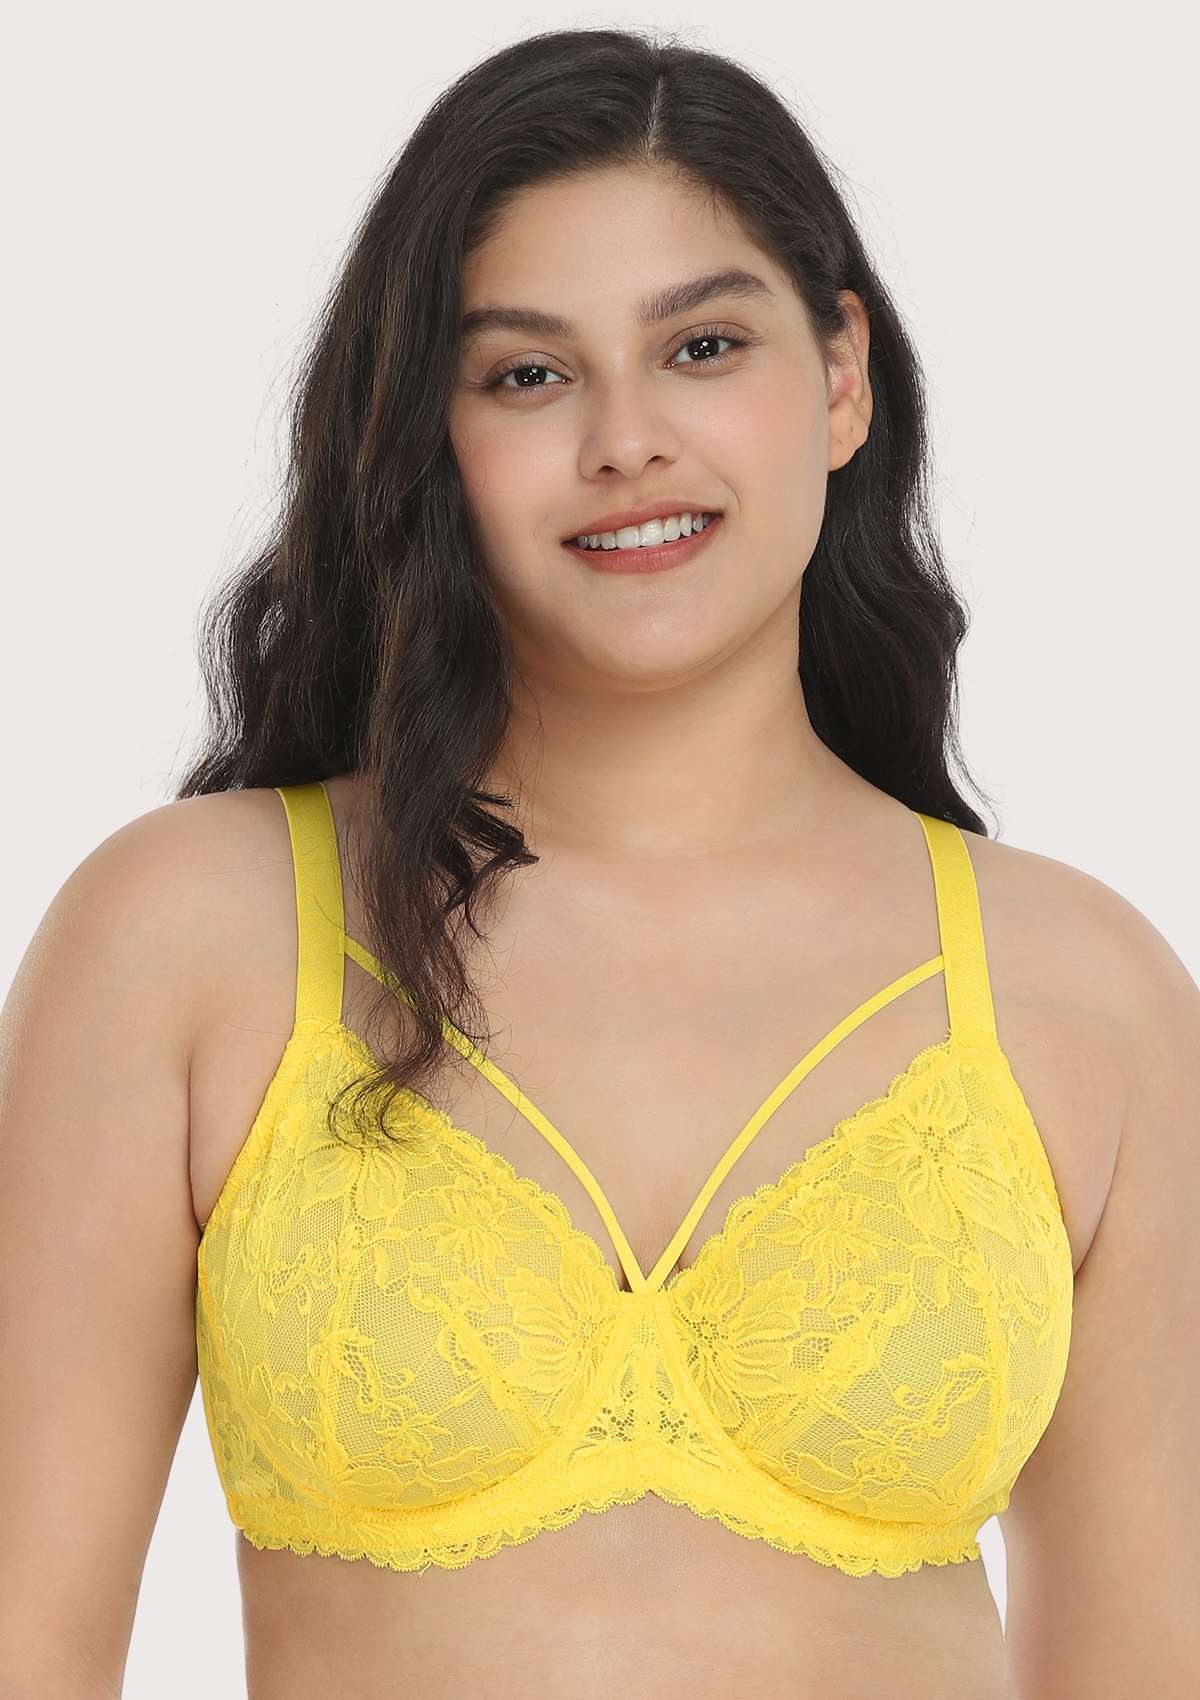 HSIA Unlined Lace Mesh Minimizer Bra For Large Breasts, Full Coverage - Bright Yellow / 34 / DDD/F